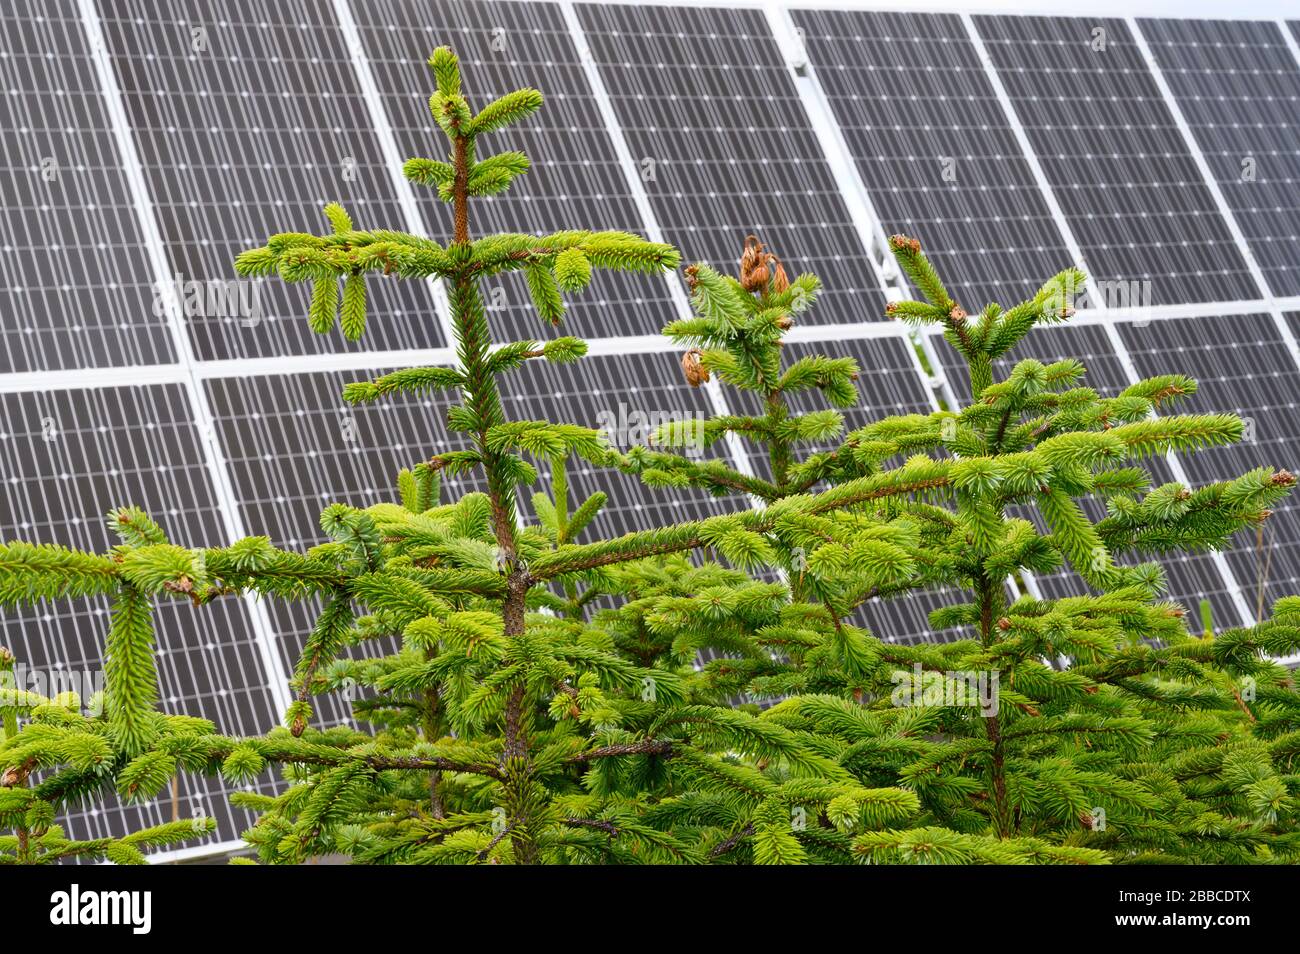 Solar Panels for off grid home, North Beach, Haida Gwaii, Formerly known as Queen Charlotte Islands, British Columbia, Canada Stock Photo